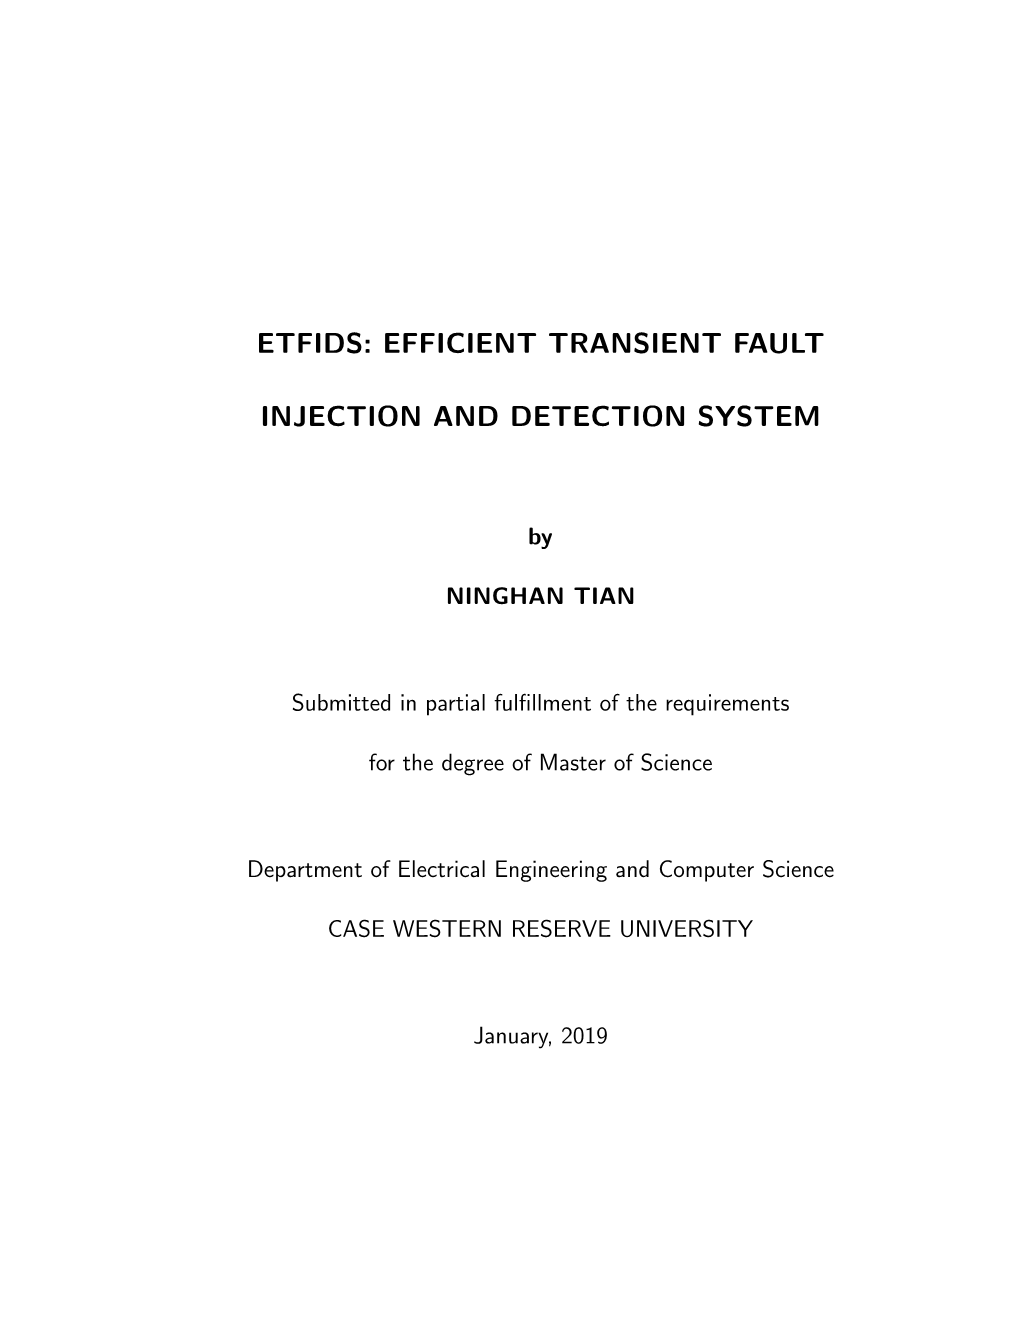 Etfids: Efficient Transient Fault Injection and Detection System